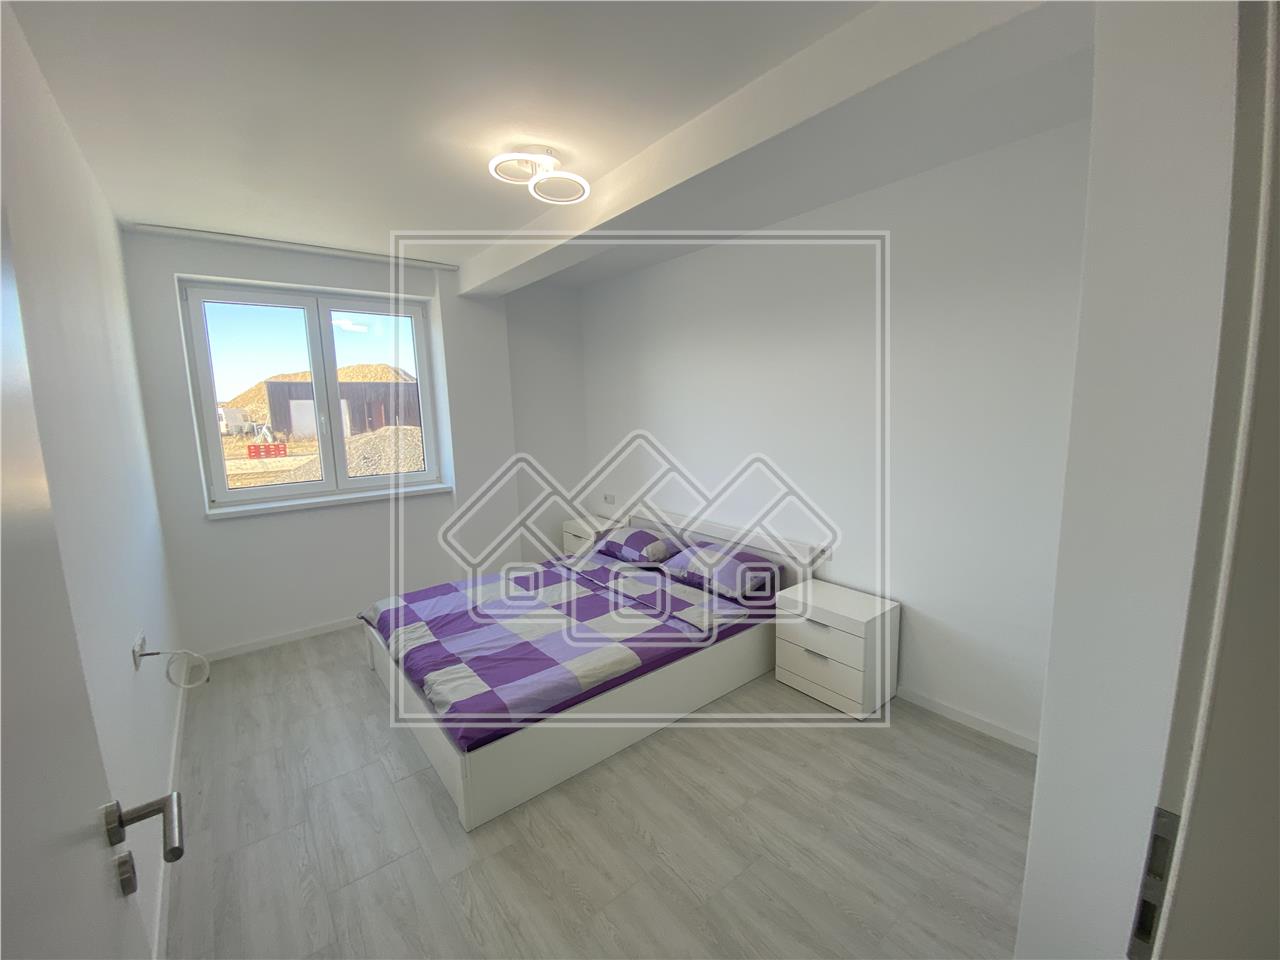 Apartment for sale in Alba Iulia - Sebes - 3 rooms and balcony